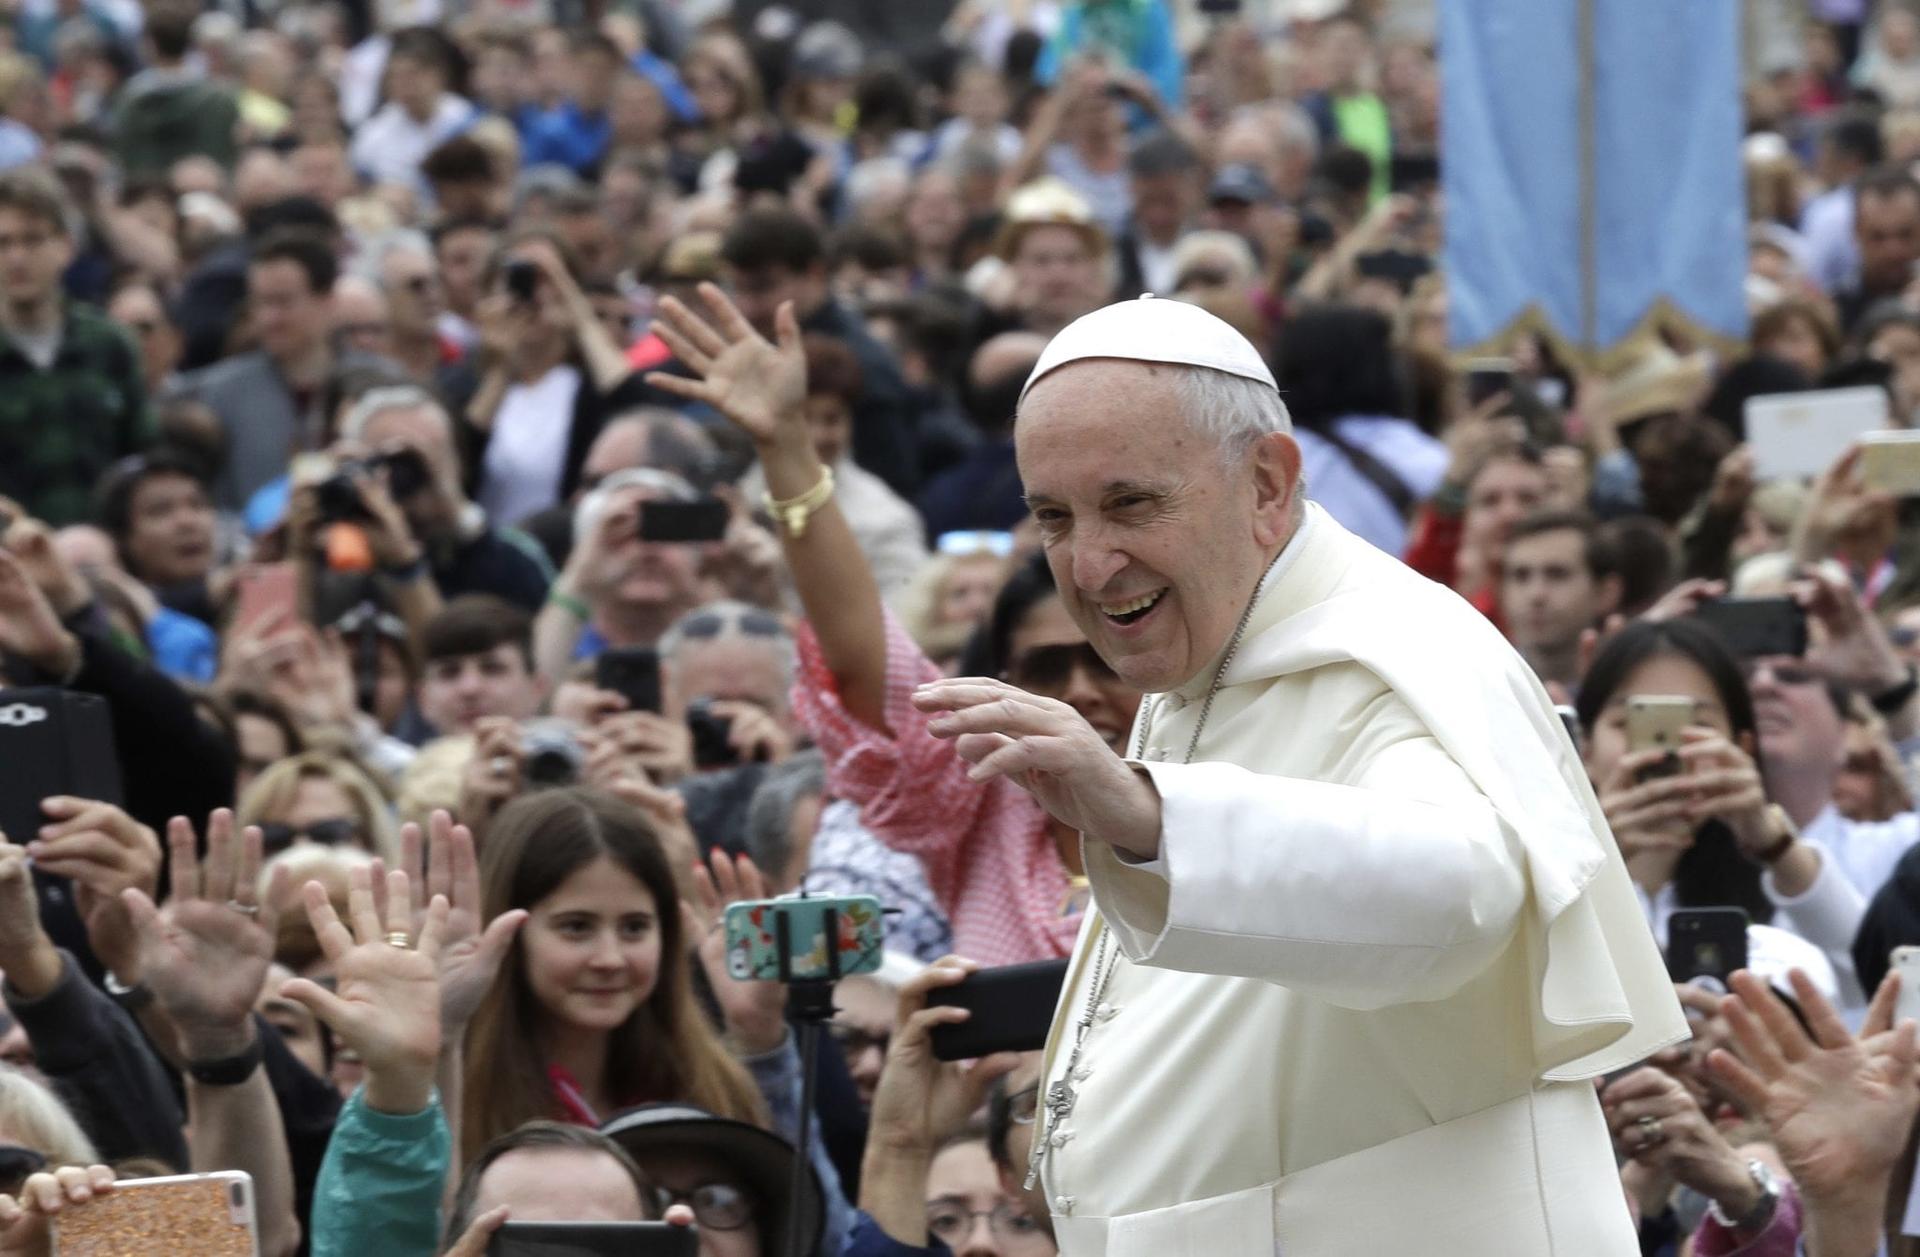 The Holy Spirit makes our works effective, Pope Francis says